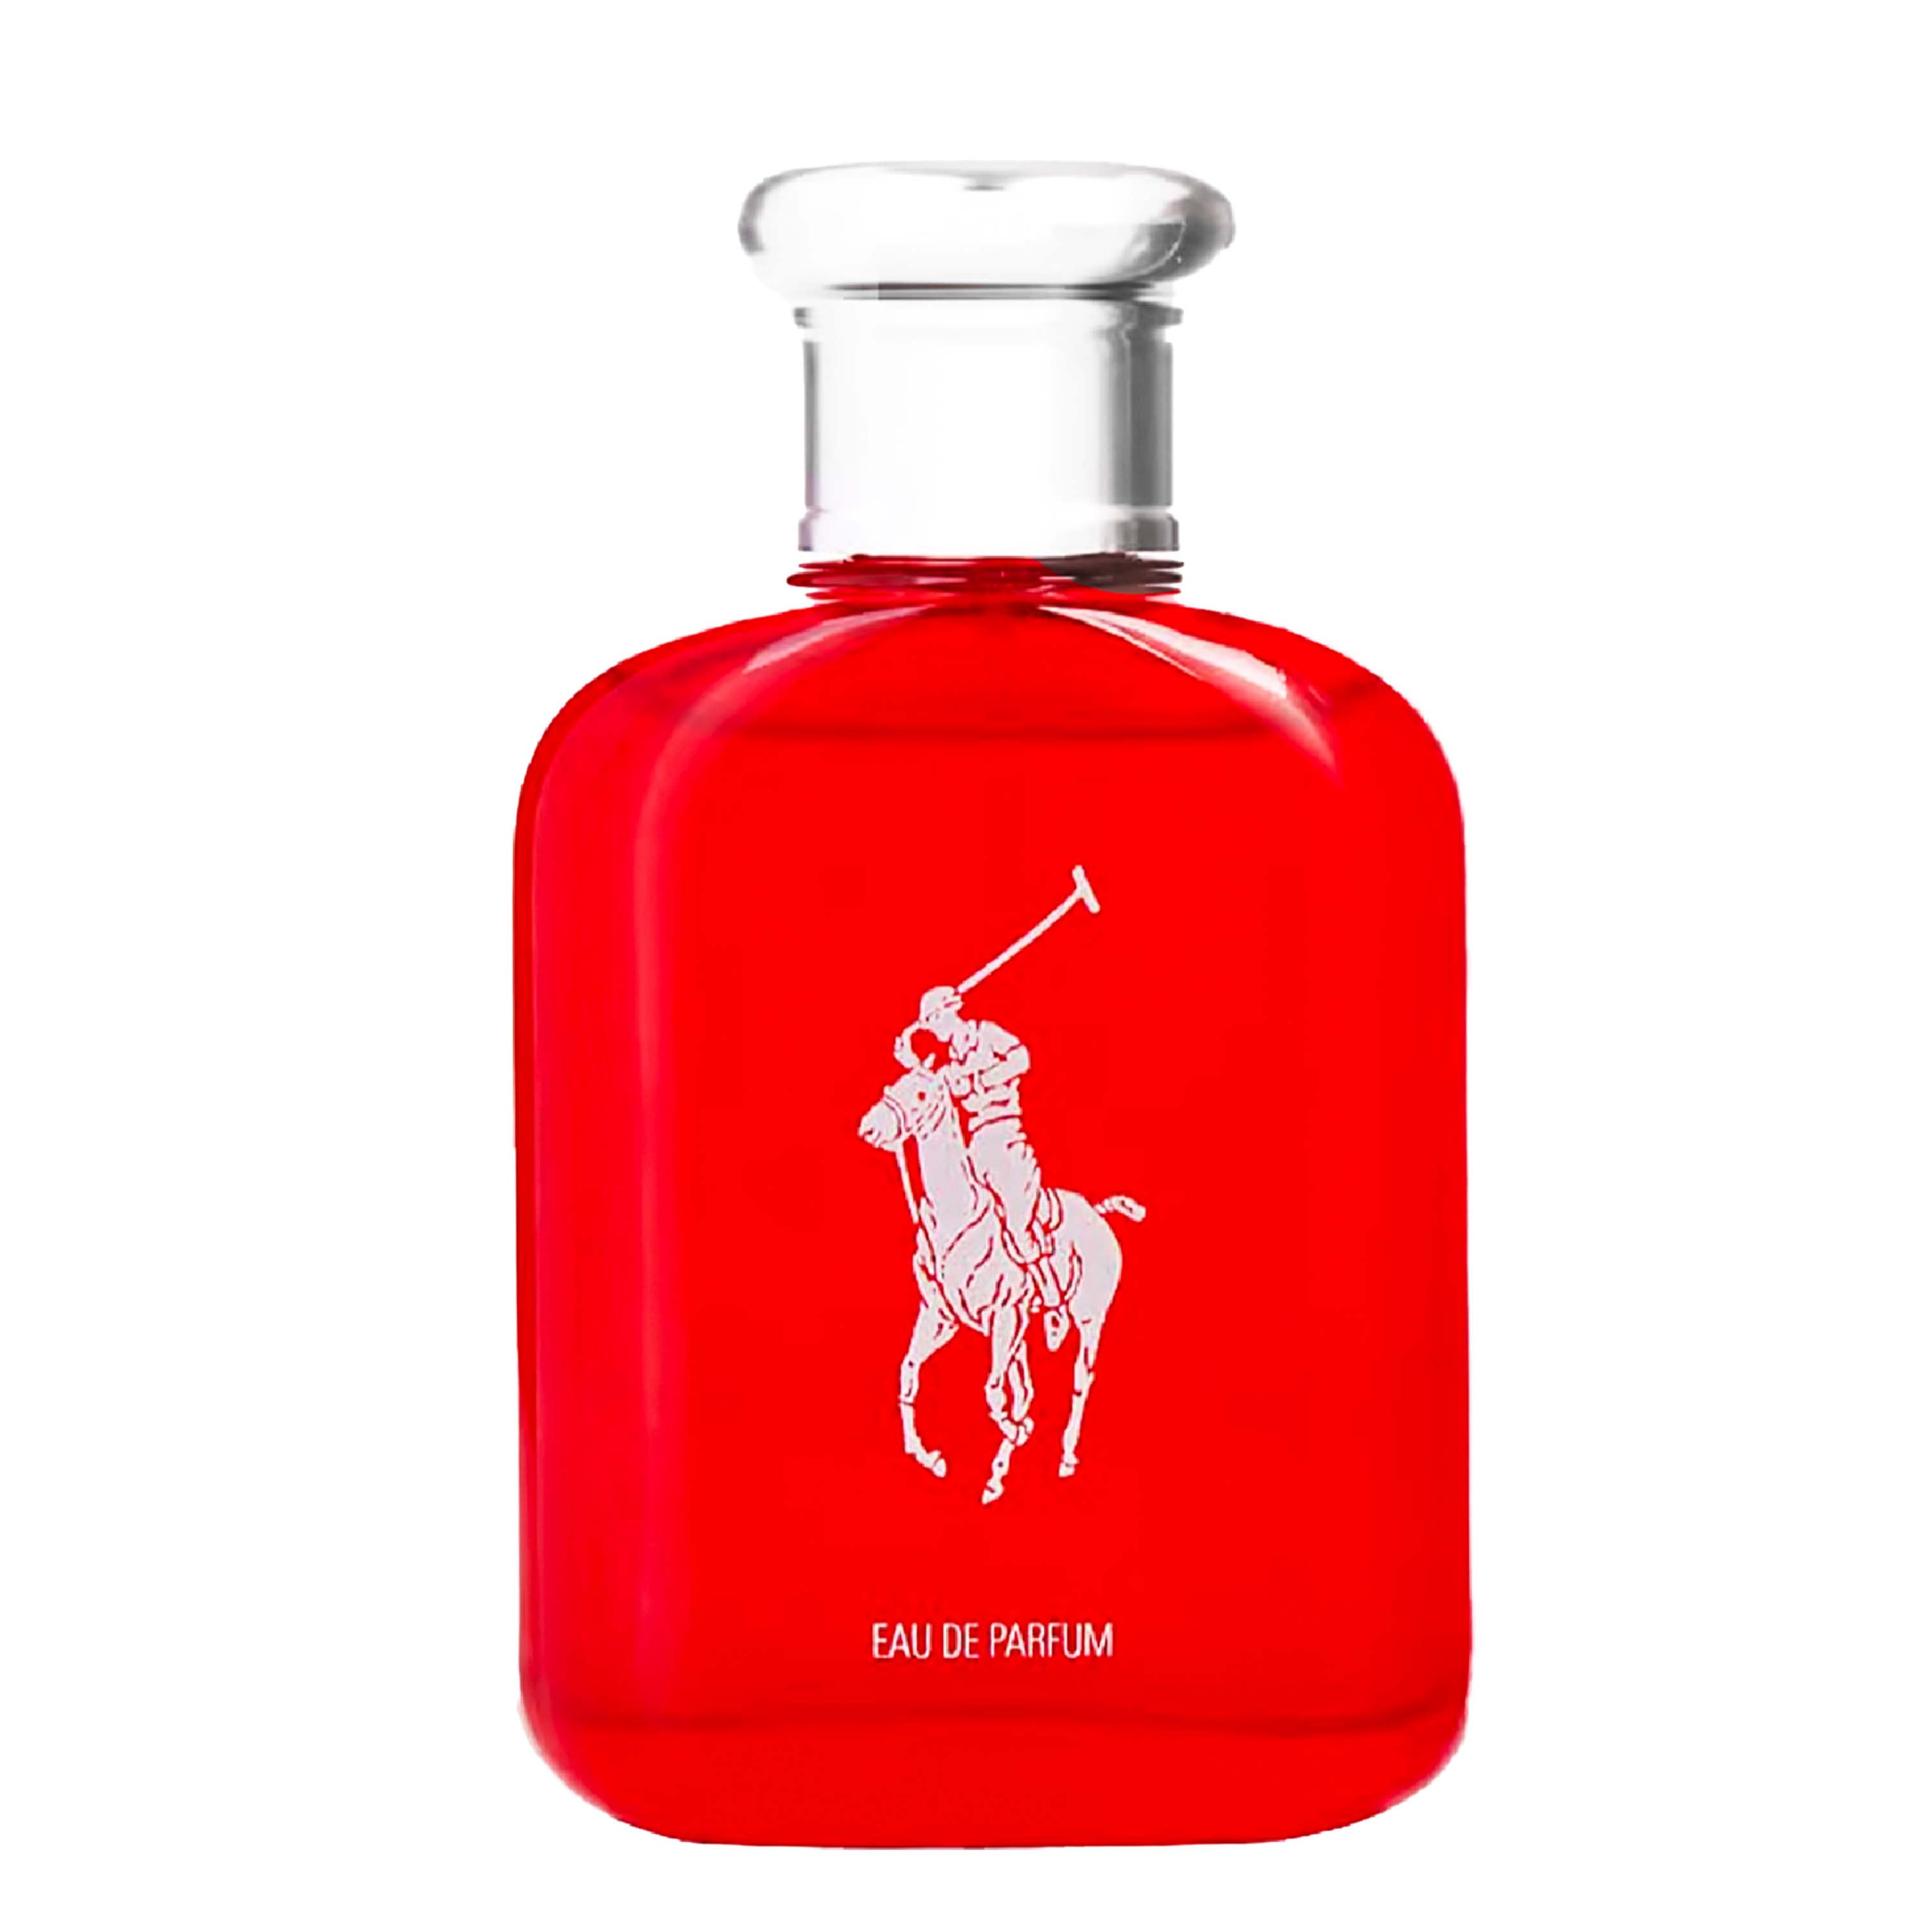  Ralph Lauren - Polo Red - Parfum - Men's Cologne - Ambery &  Woody - With Absinthe, Cedarwood, and Musk - Intense Fragrance - 1.36 Fl Oz  : Beauty & Personal Care